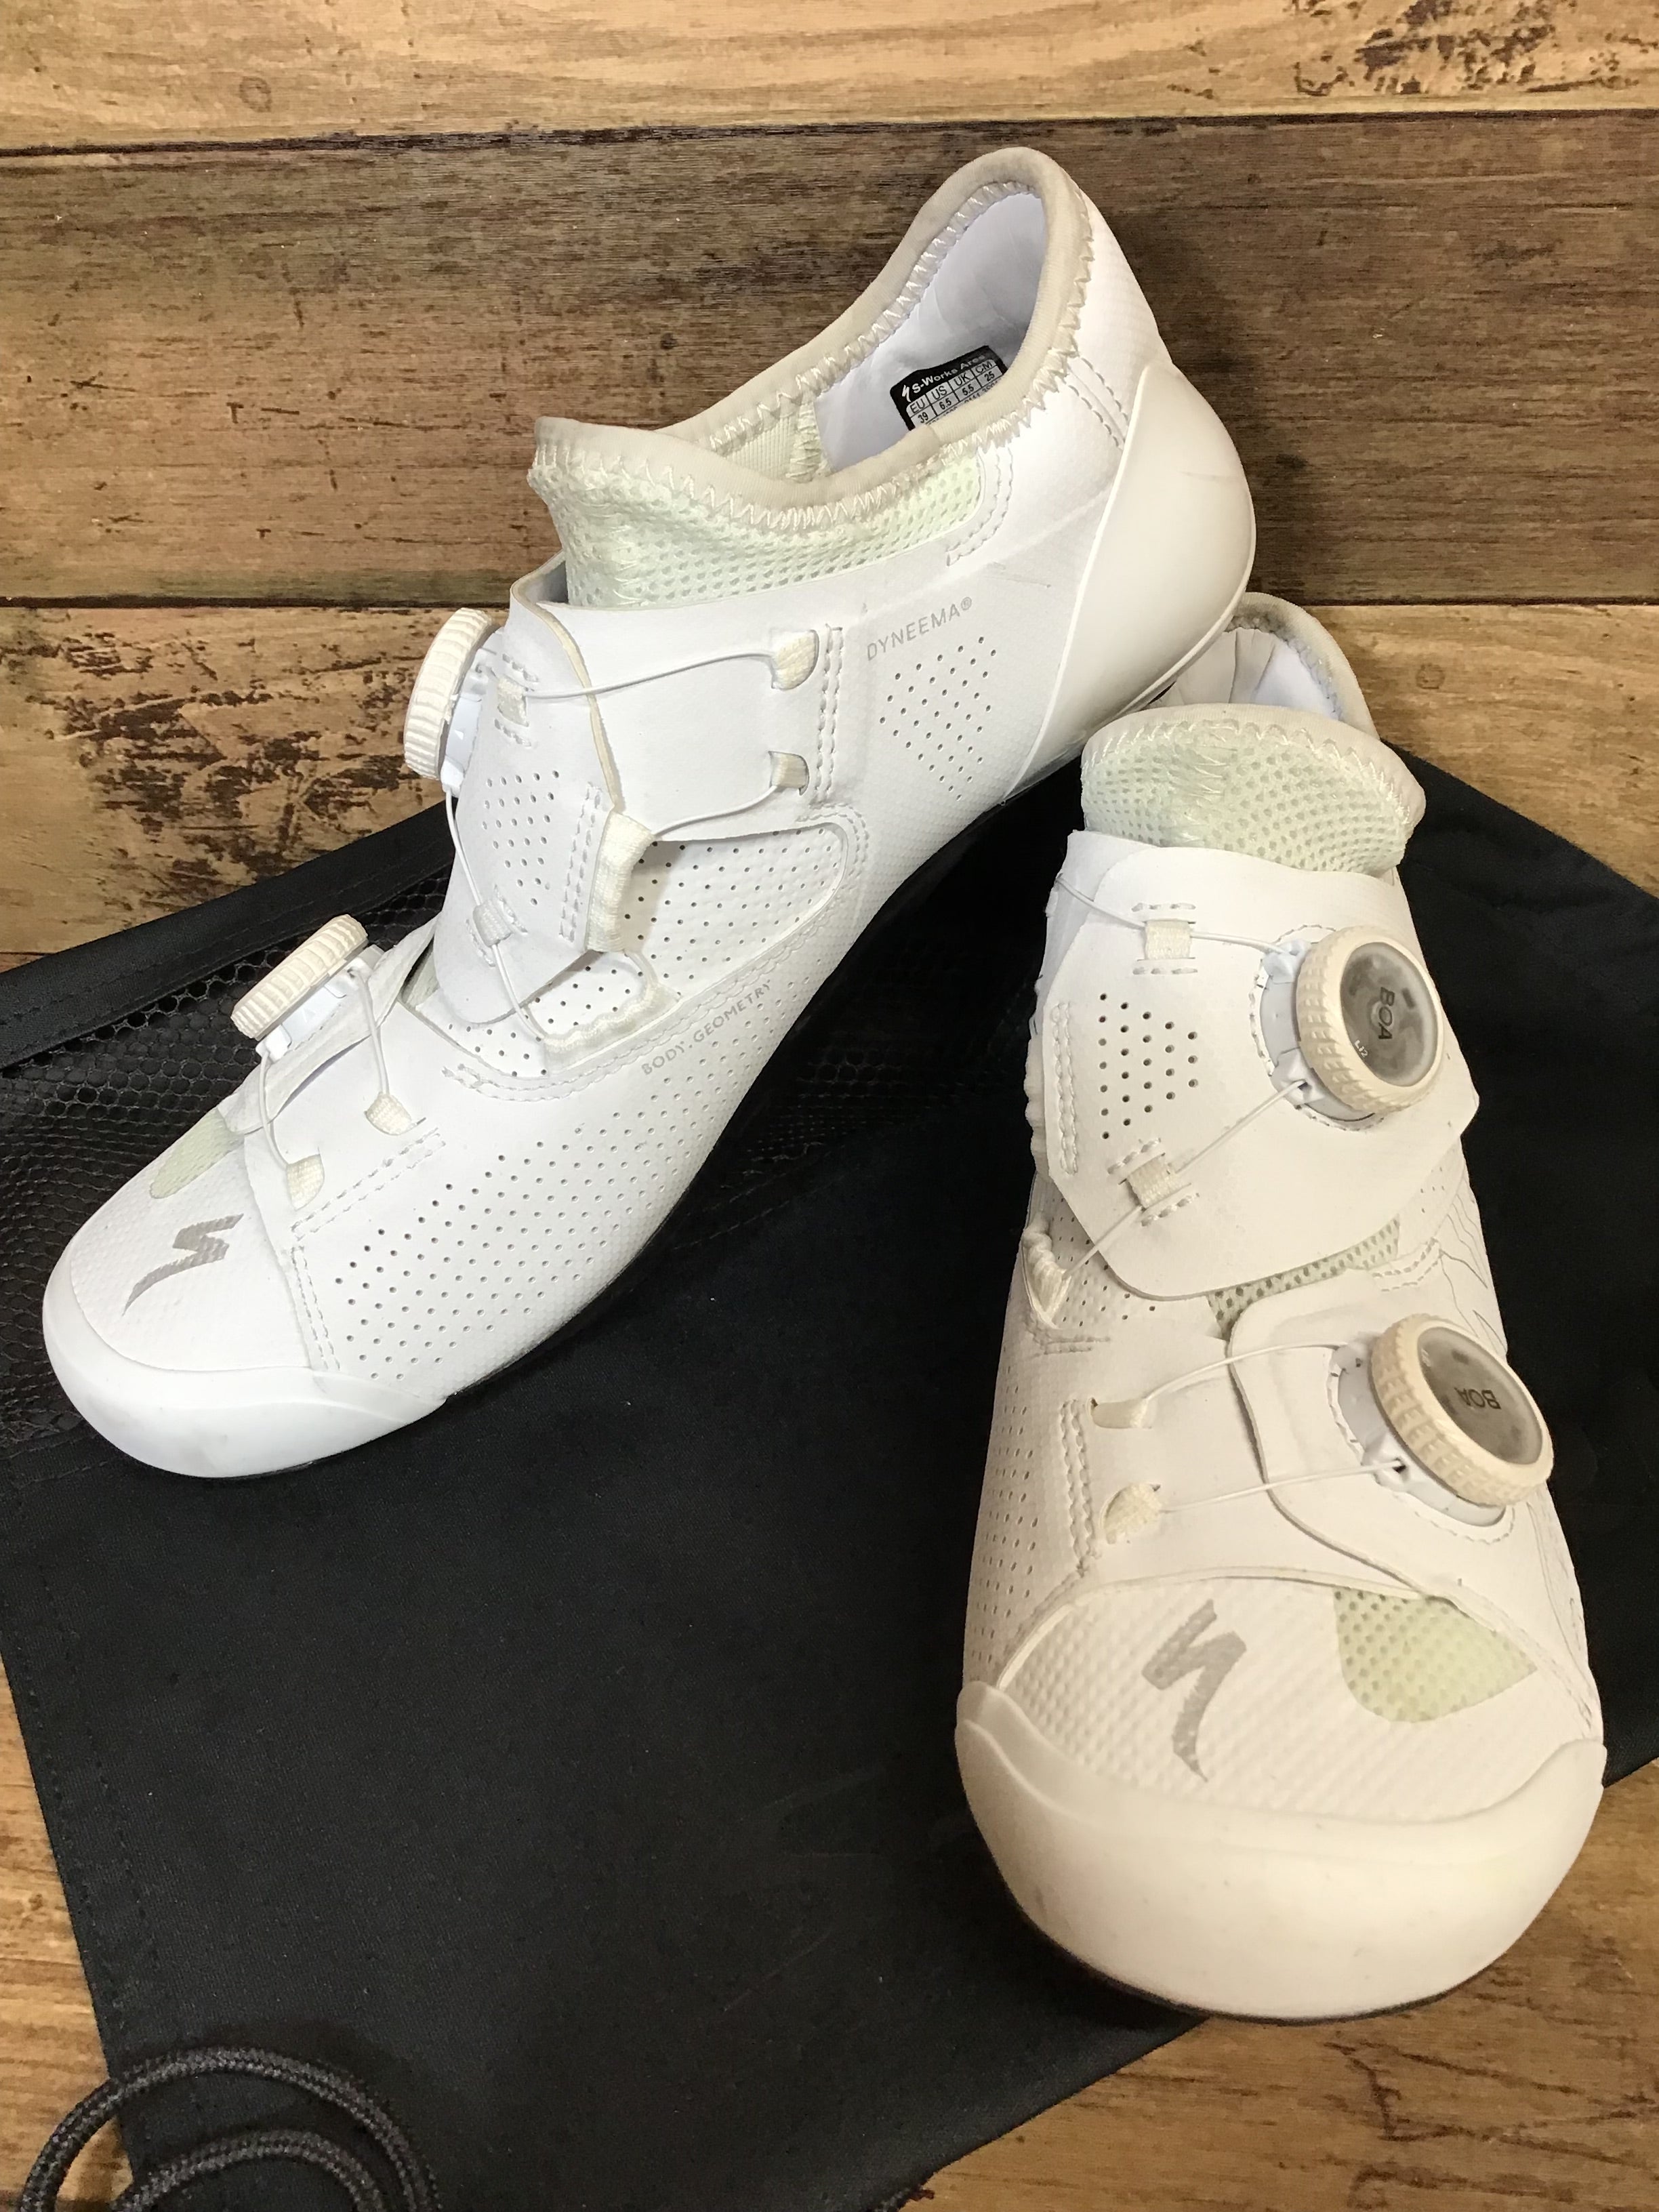 HK181 スペシャライズド SPECIALIZED S-WORKS ARES RD SHOE ビンディングシューズ WHT 39